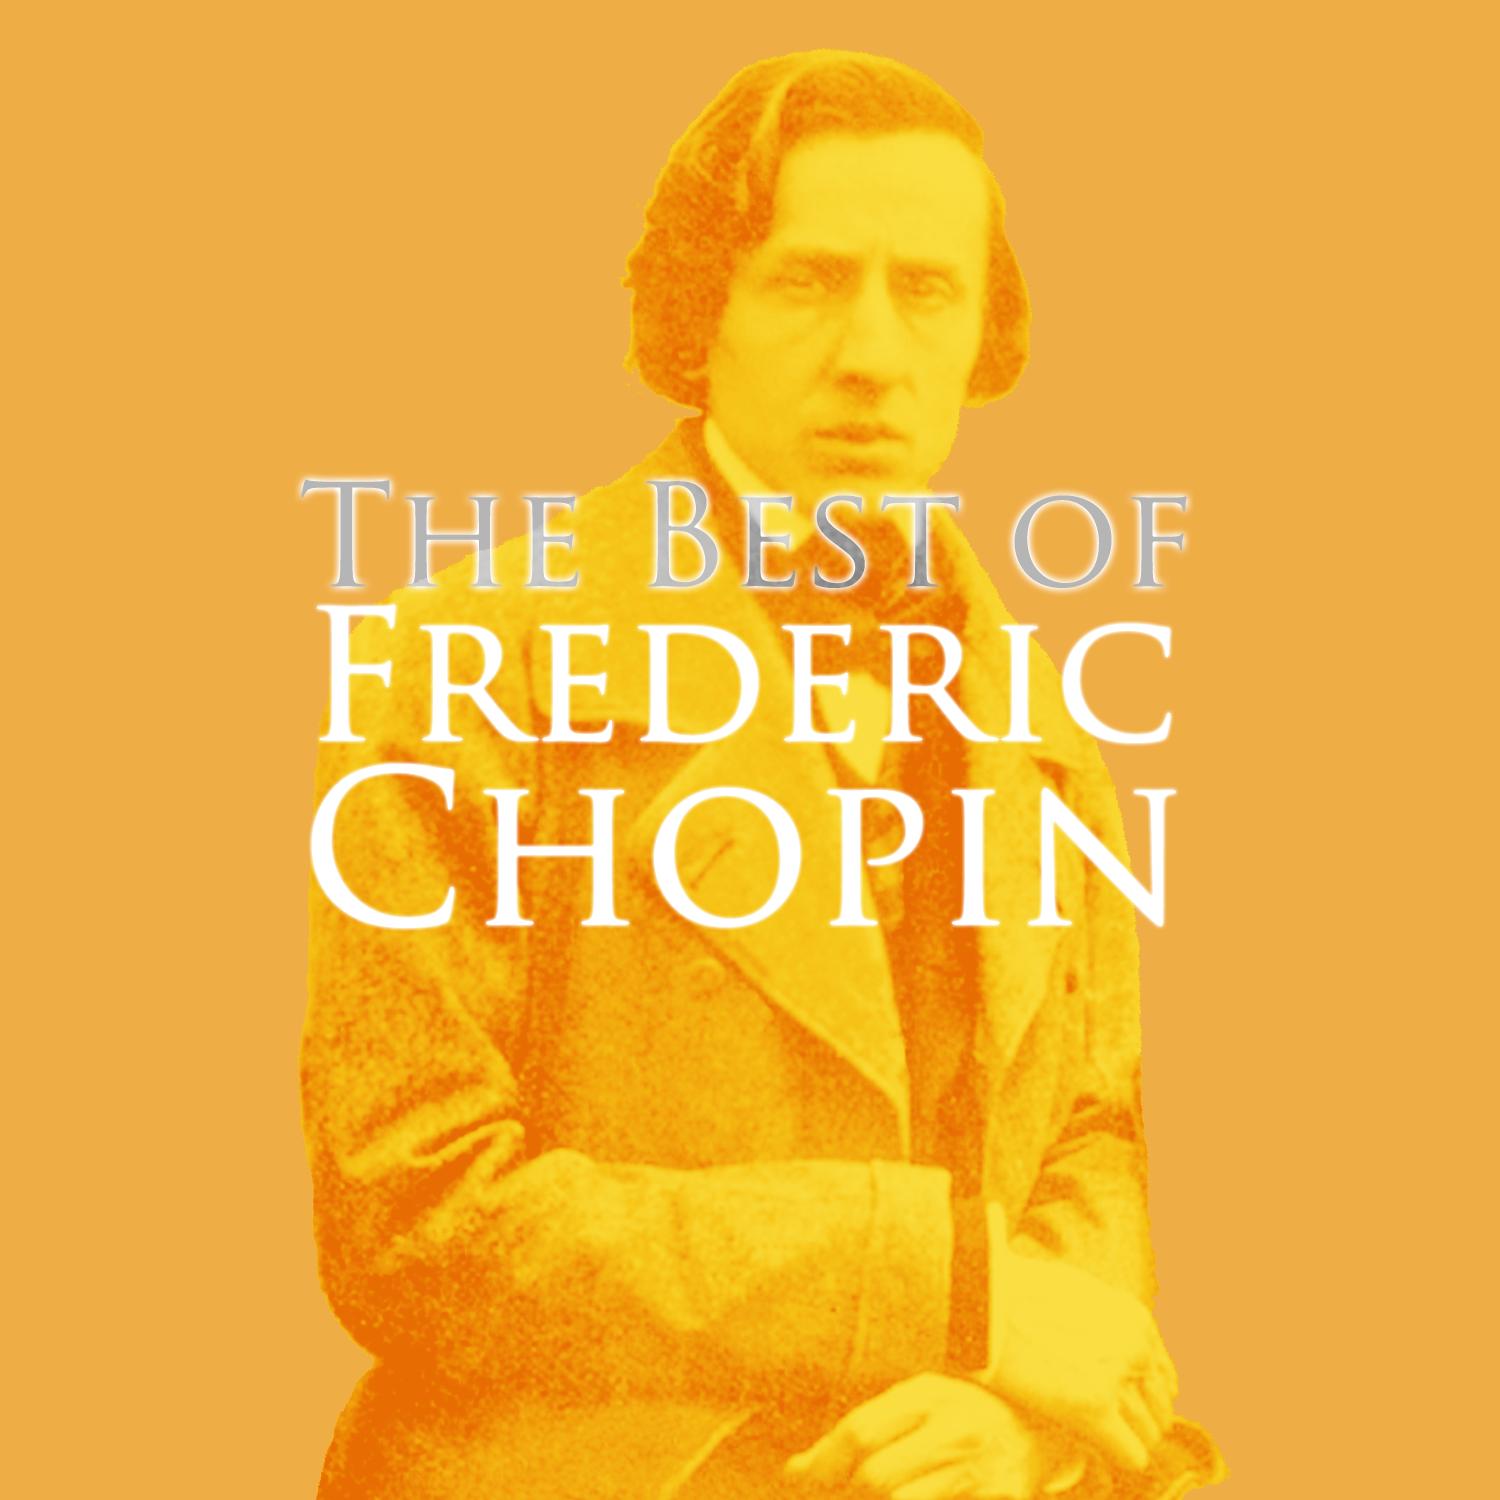 Classical Music for Concentration: Study with Chopin